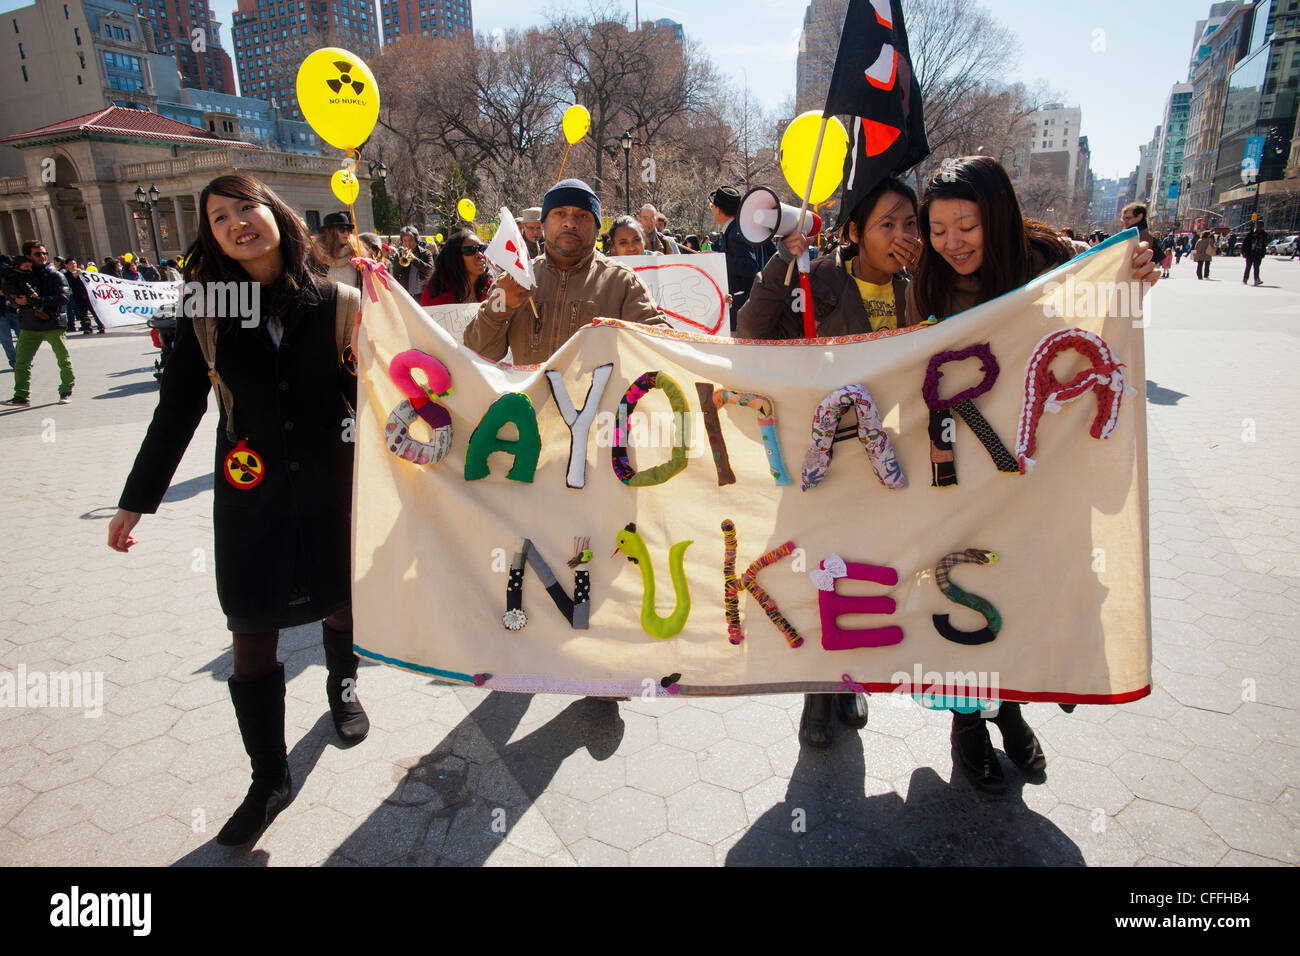 Activists in New York gather in Union Square Park to protest the use of nuclear energy Stock Photo